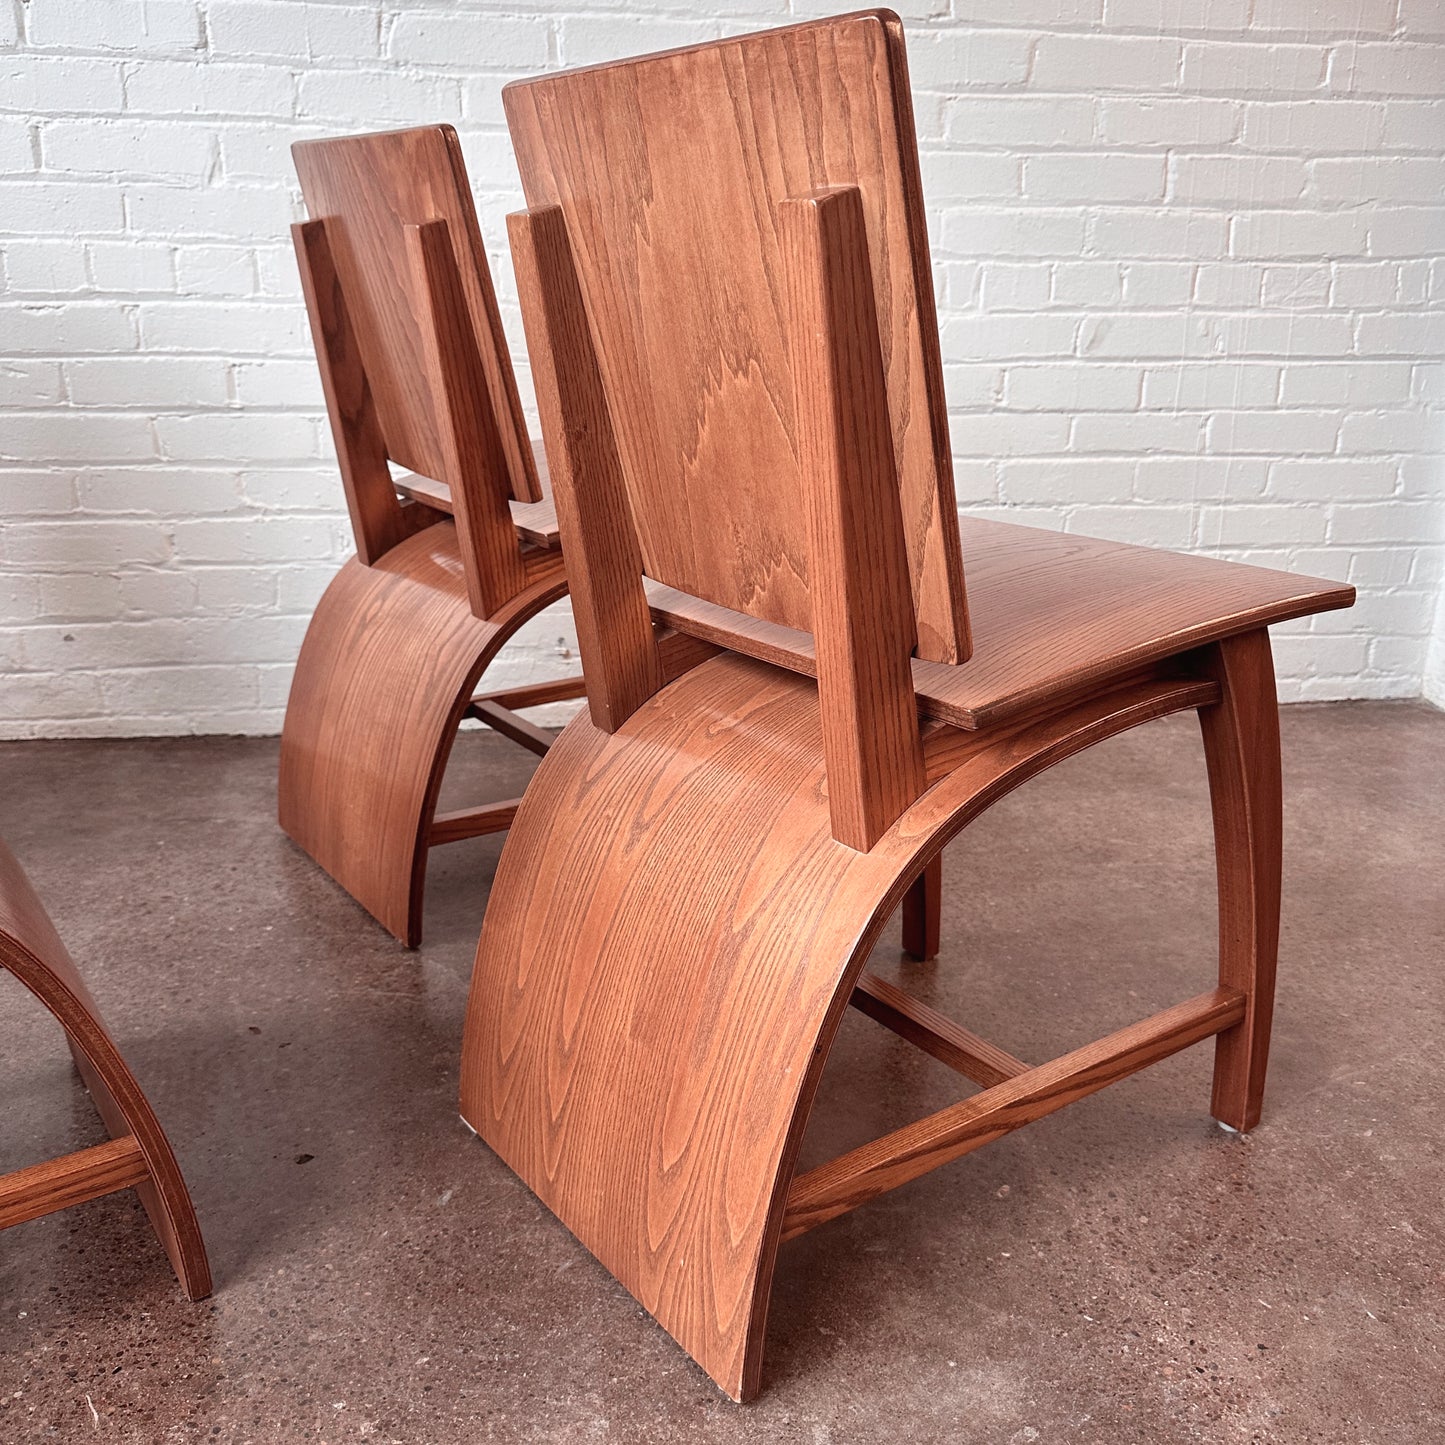 BENTWOOD CHAIRS BY ROBERT BLAIR - SET OF 4